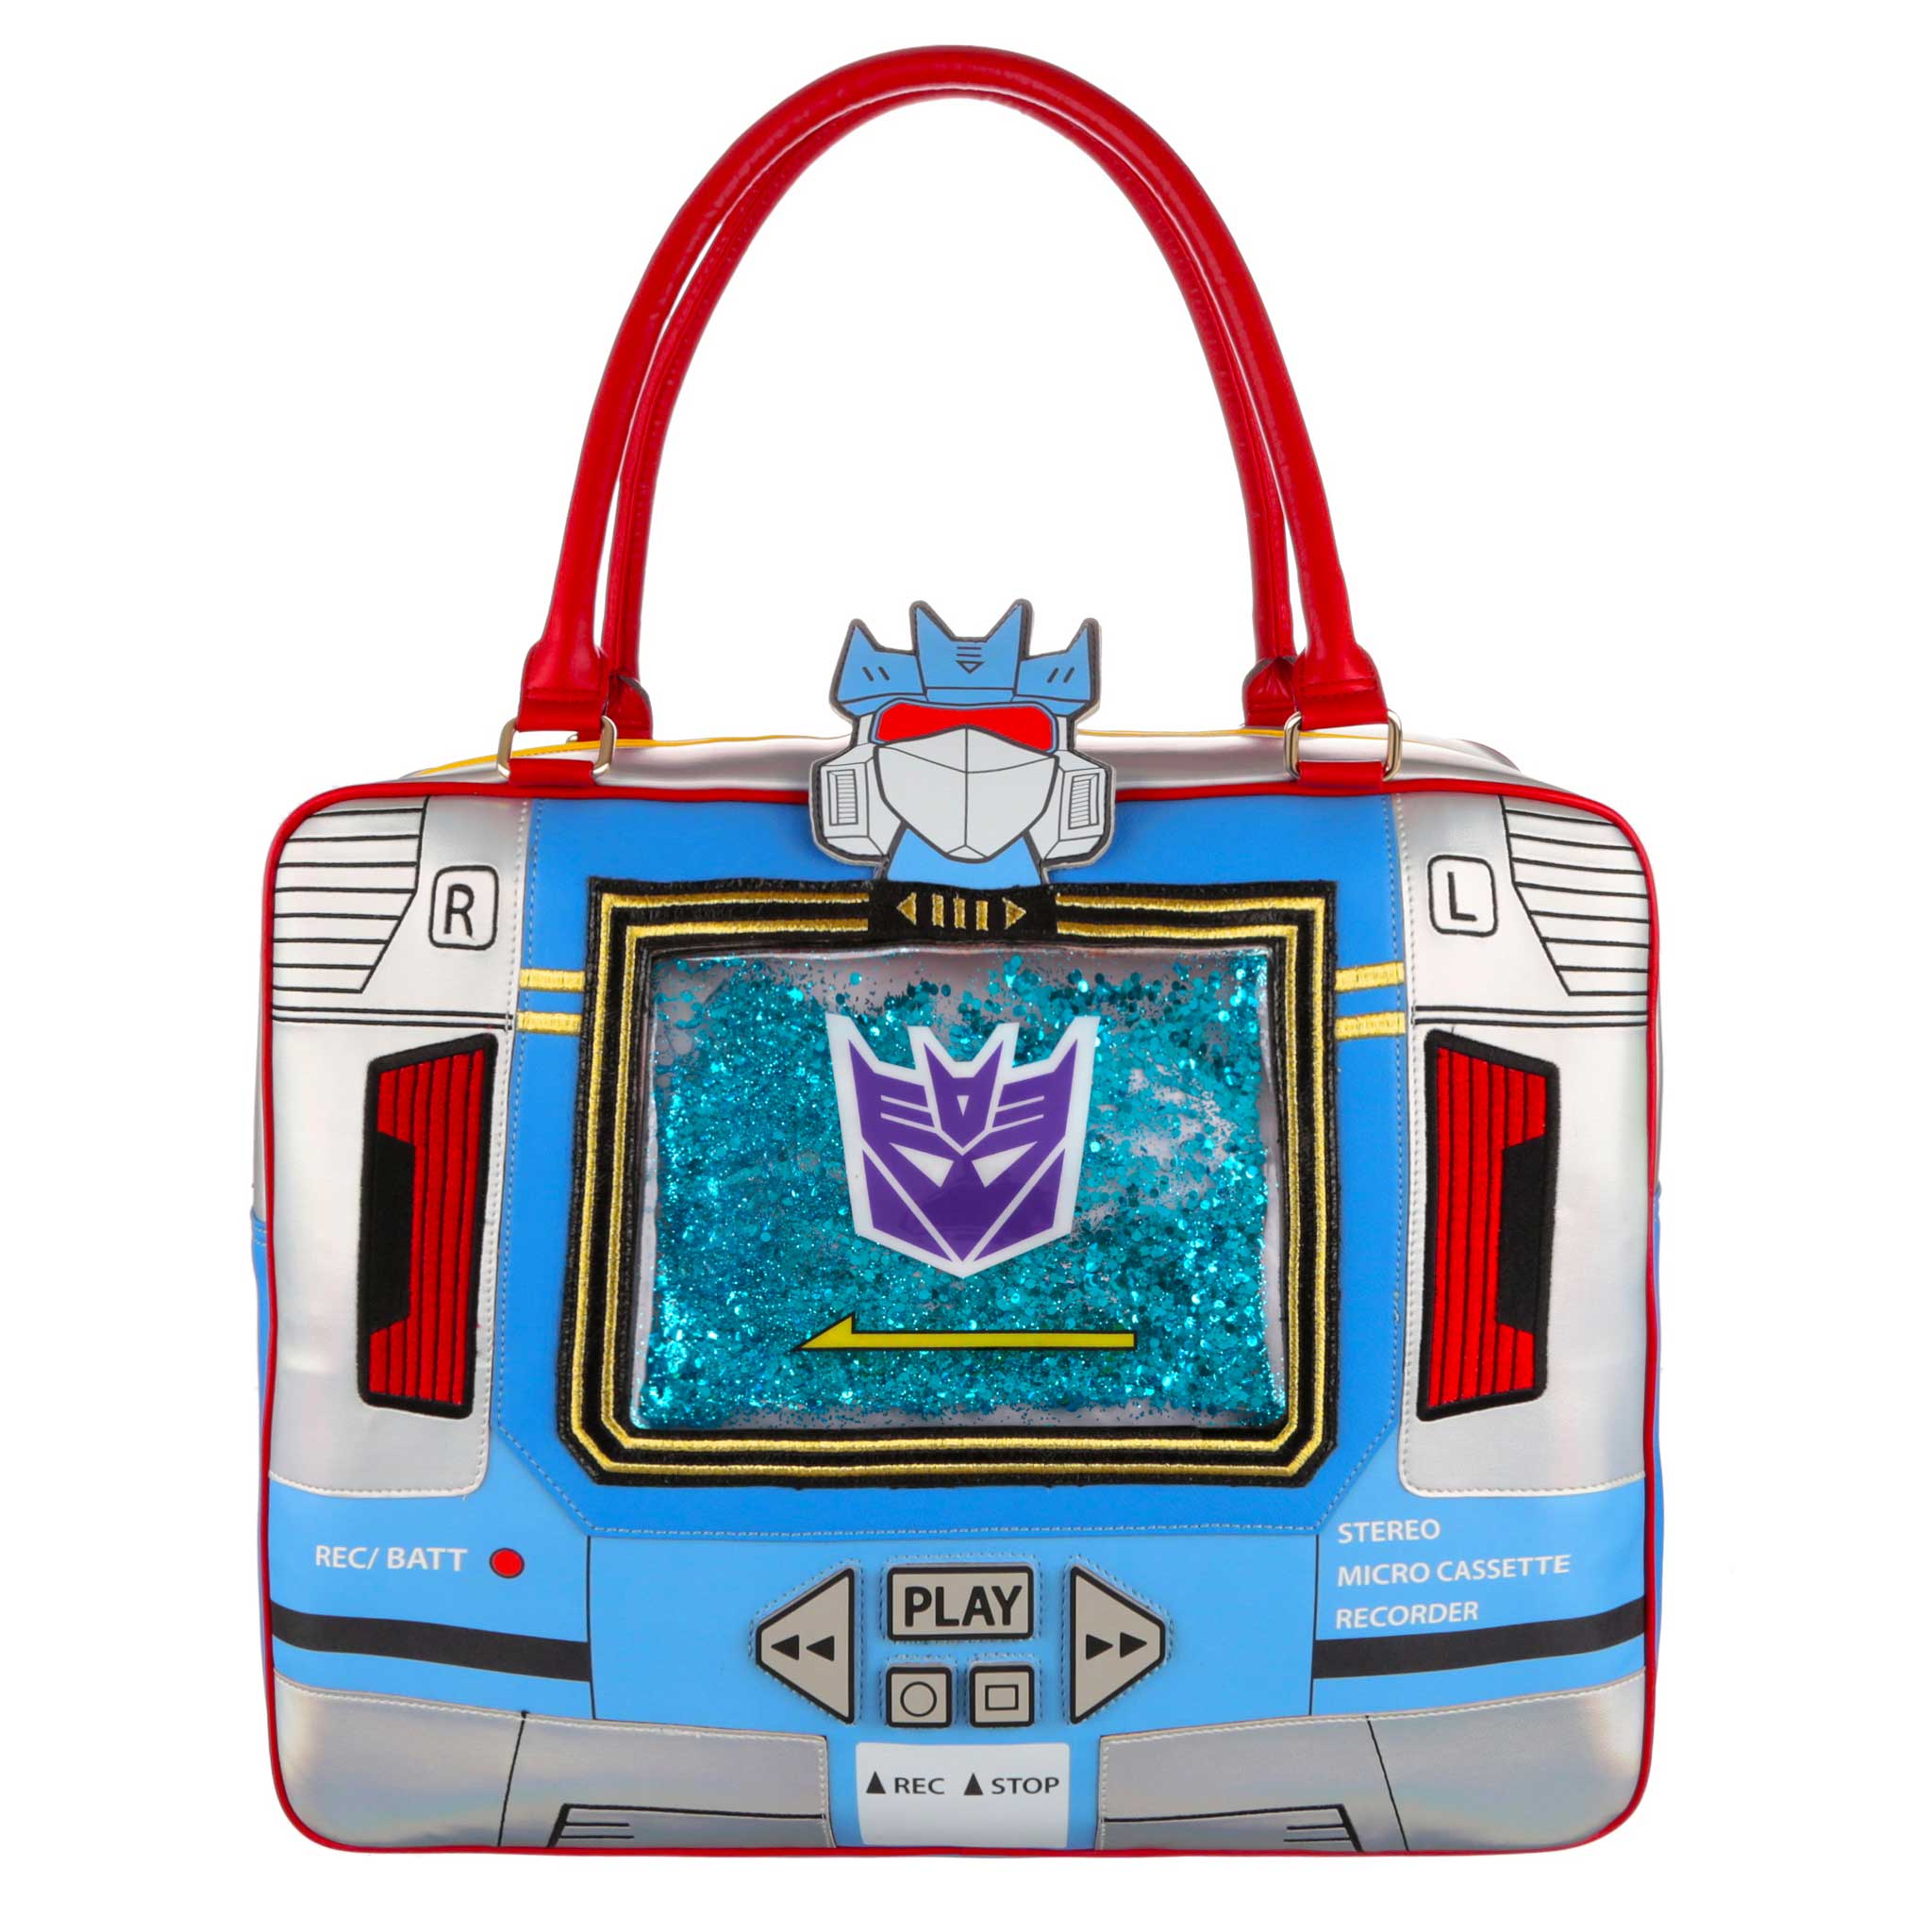 A large Transformers themed holdall in blue, silver and red. This rectangular shaped bag depicts the Transformer Soundwave robot with retro eighties cassette tape design details, it comes complete with play and stop buttons and on and off record buttons. A large blue glittering square sits on the centre of the bag where the tape deck would be with a purple Decepticon logo on it. Soundwave’s face sits at the top of the bag with a large red structured handle arching over the top of the handbag. 